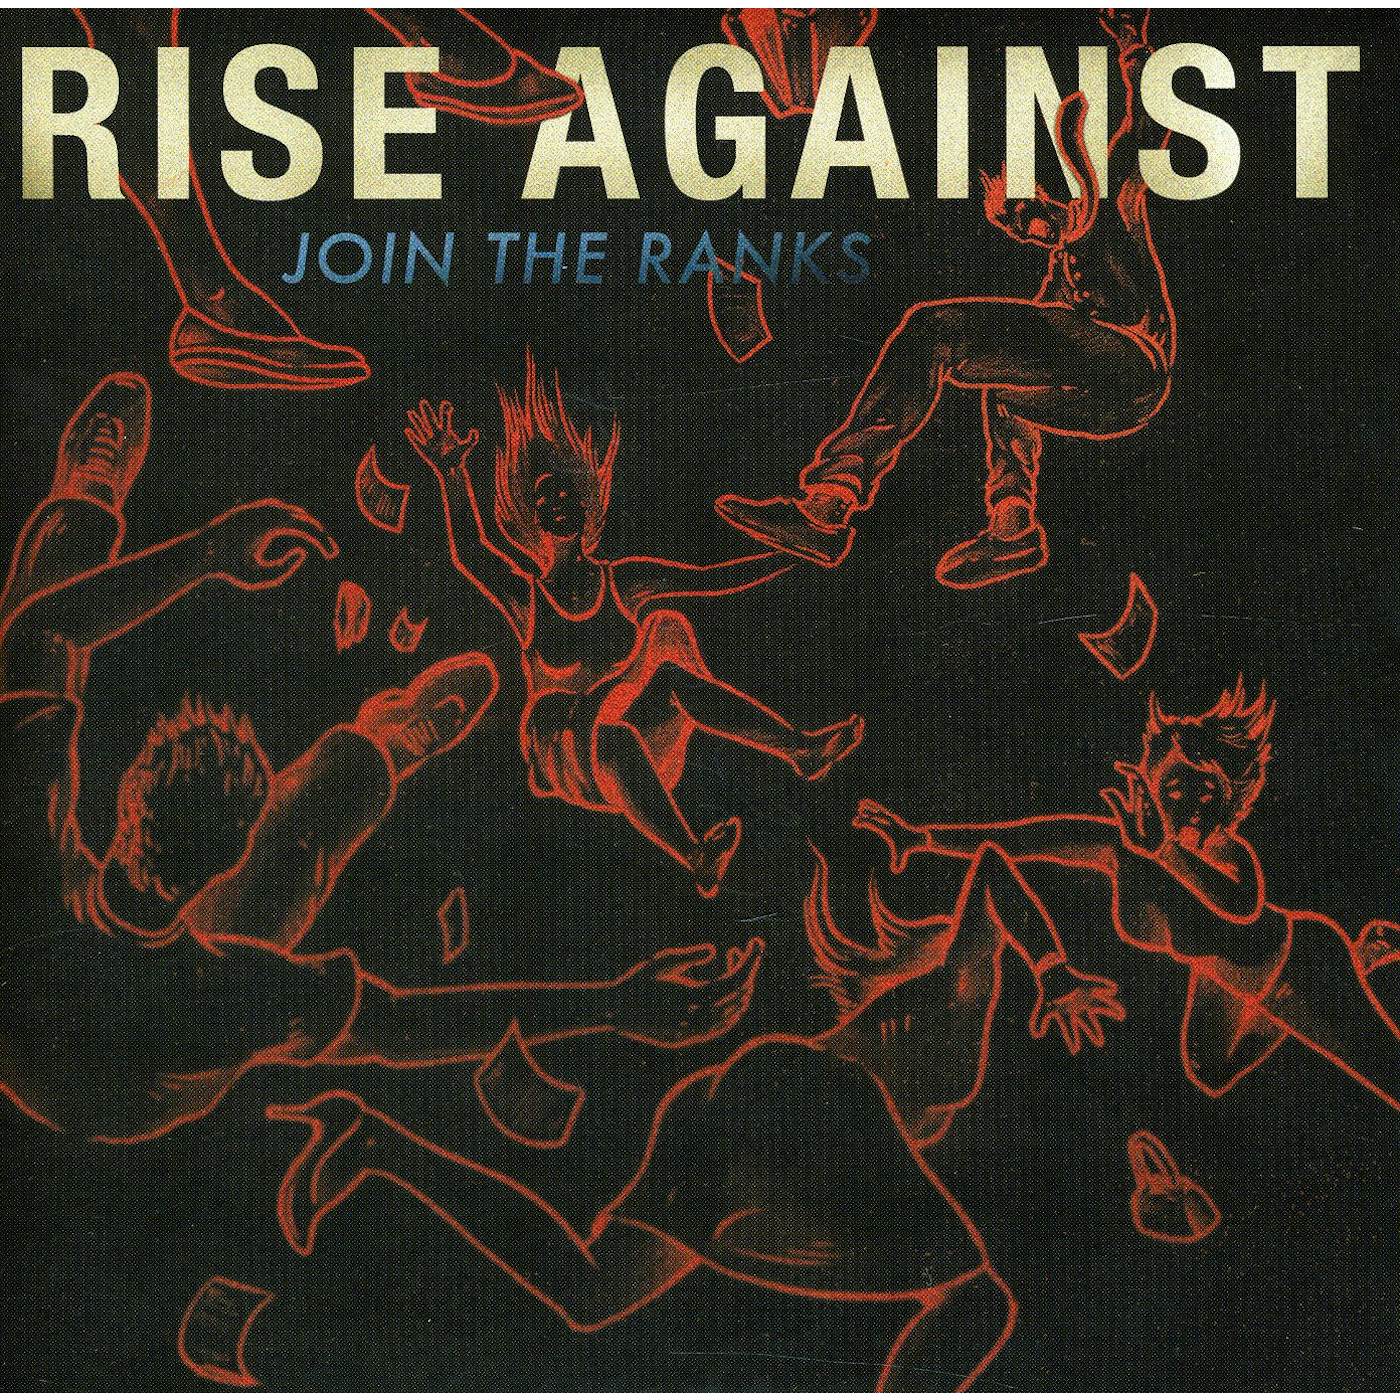 Rise Against Join The Ranks Vinyl Record